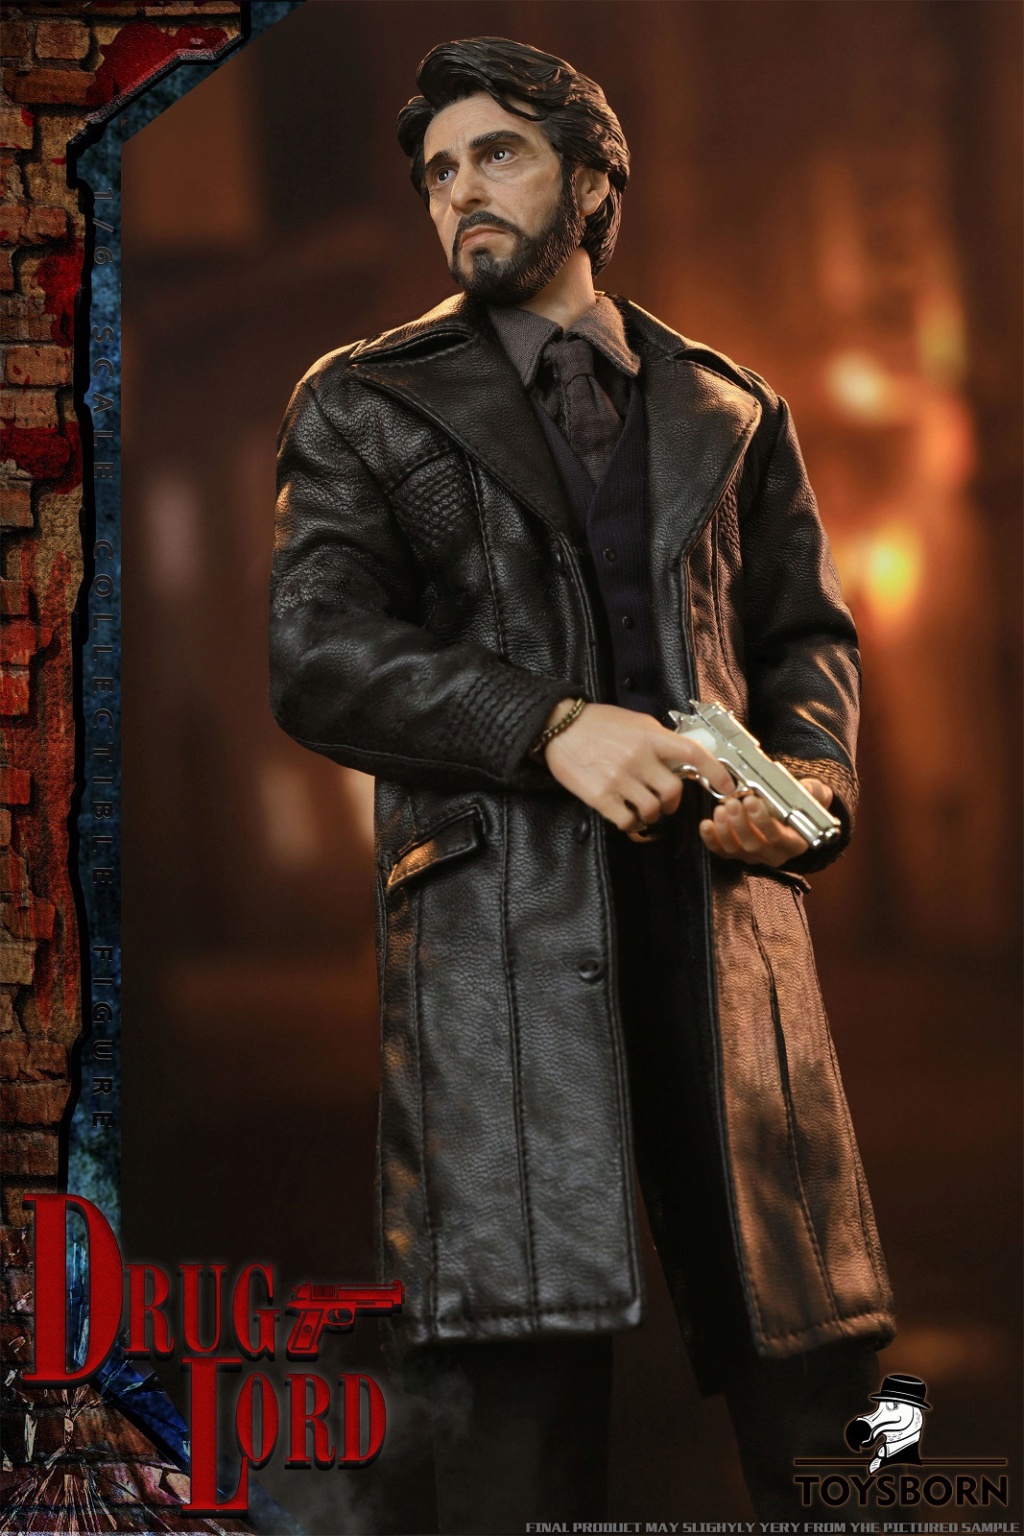 ToysBorn - NEW PRODUCT: TOYS BORN: TB003 1/6 Scale The Drug Lord 21043710